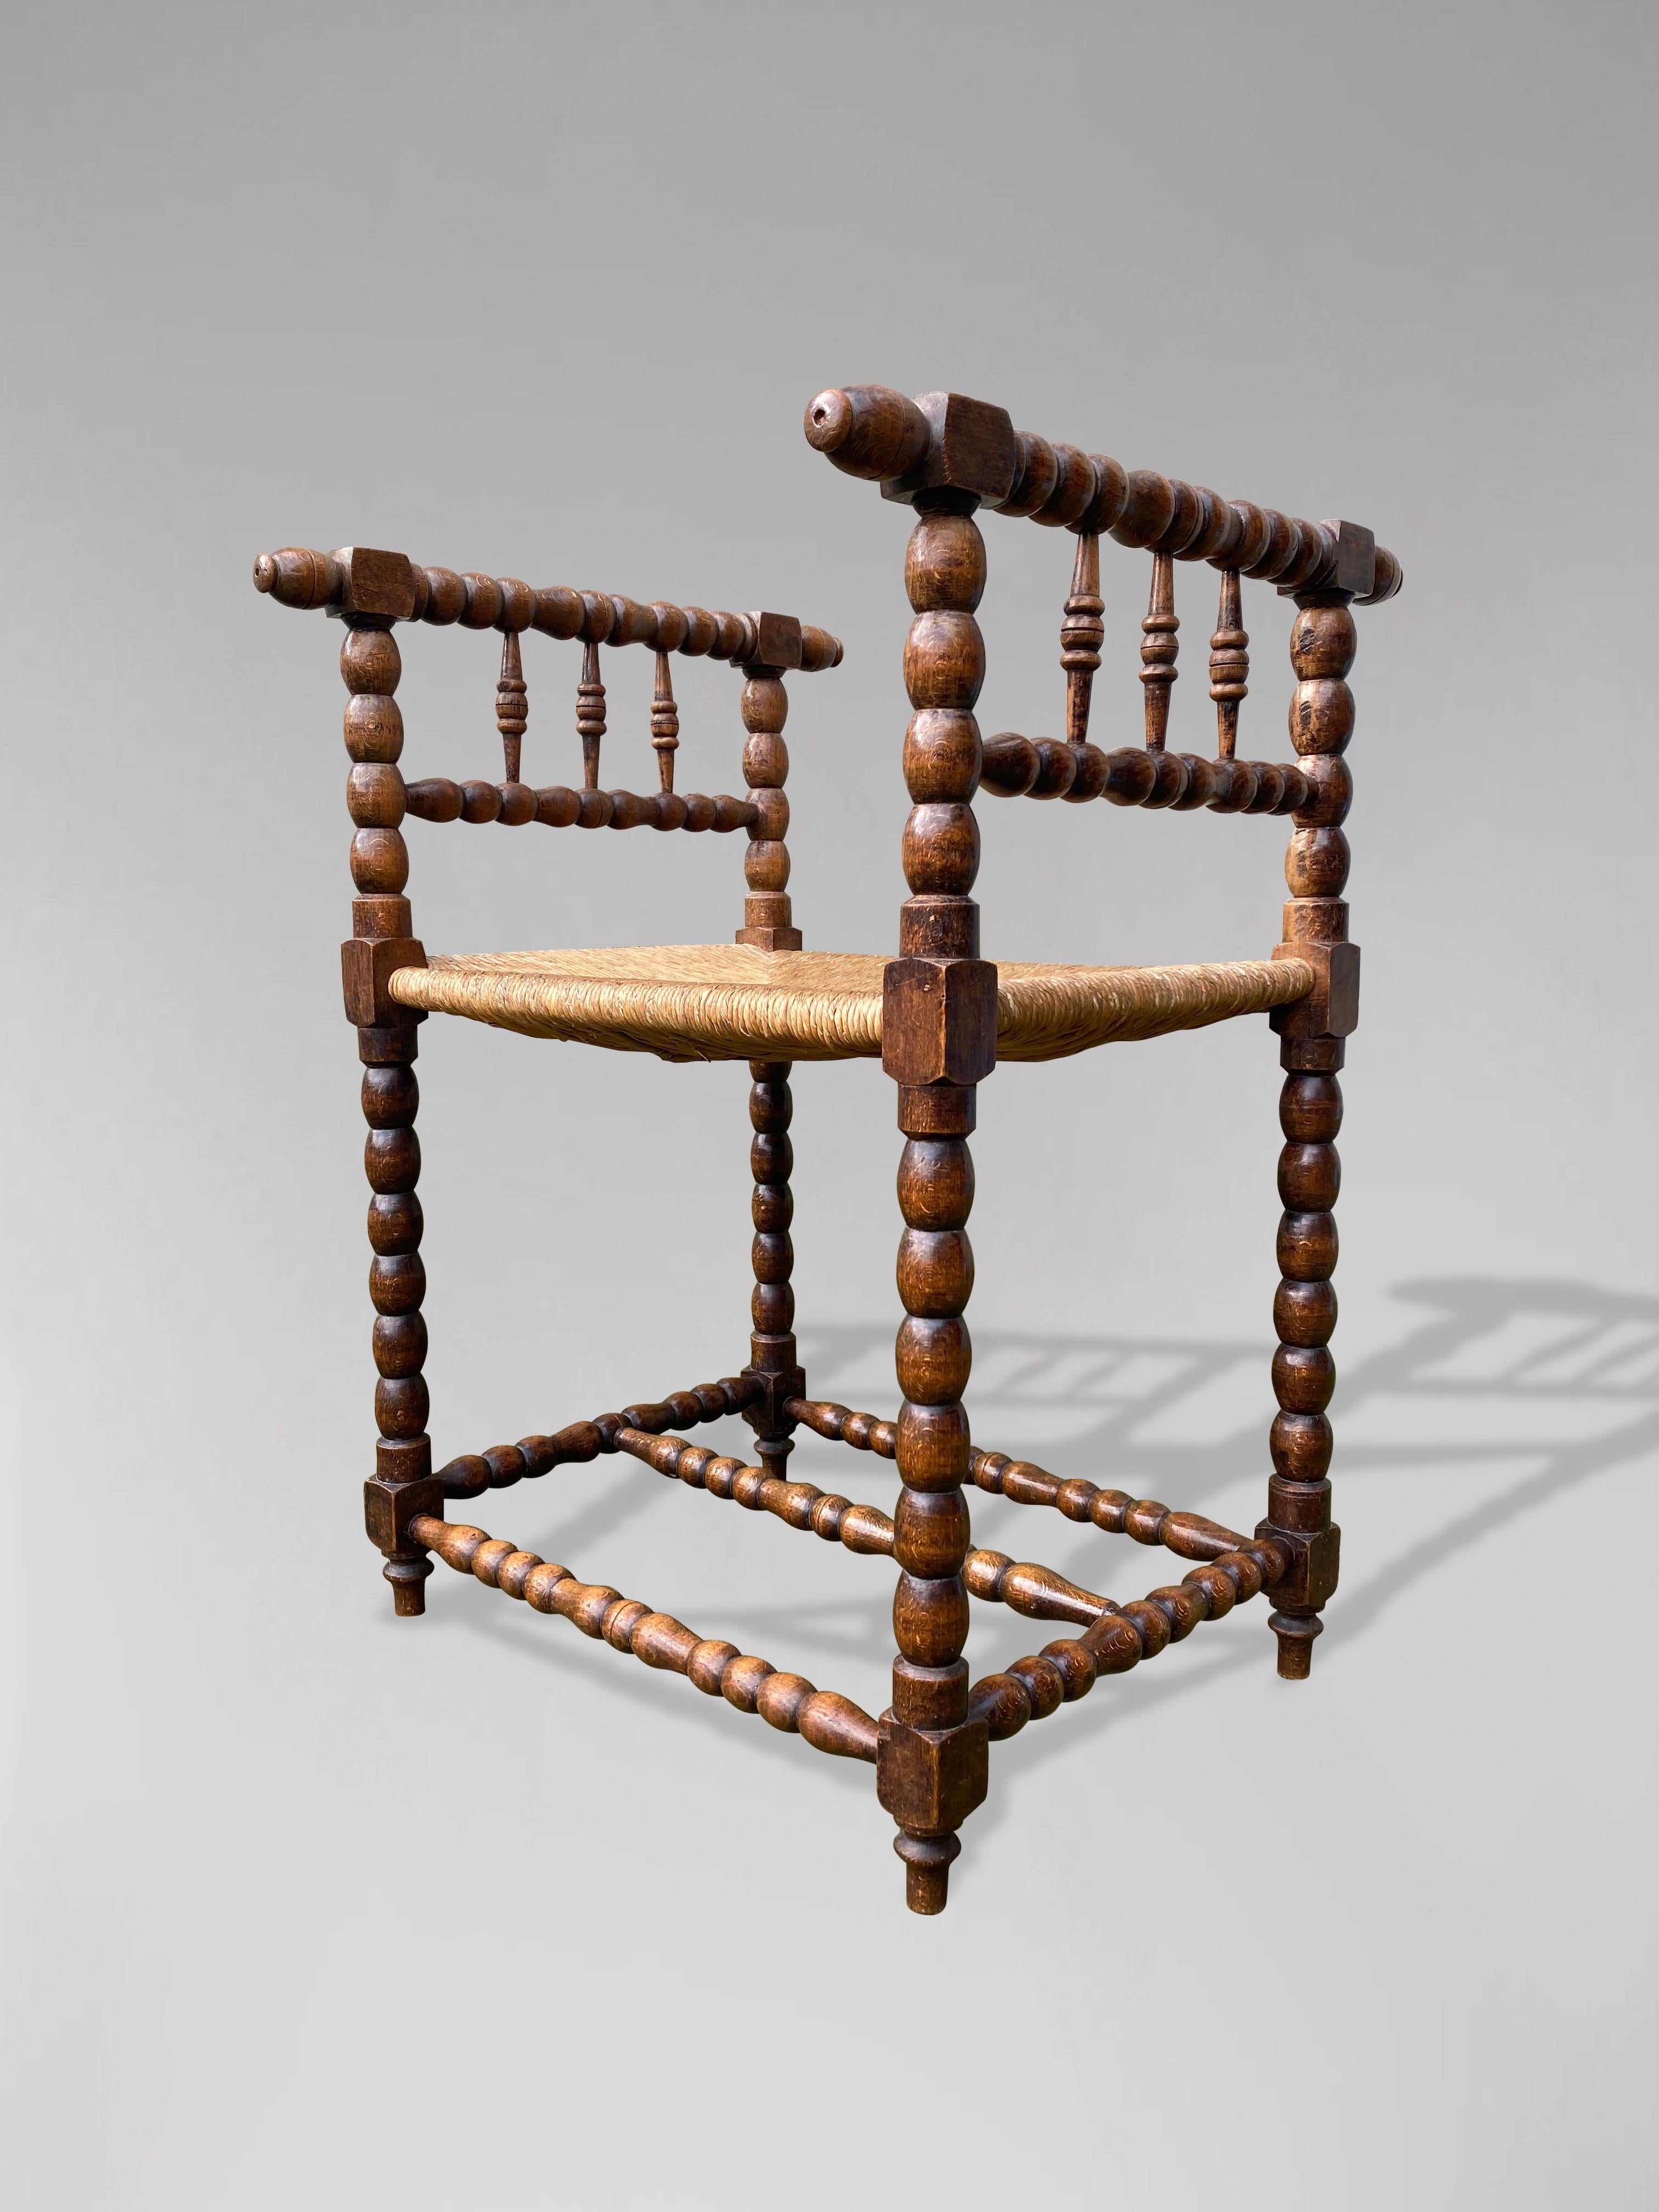 19th Century Walnut Bobbin Stool In Fair Condition For Sale In Petworth,West Sussex, GB